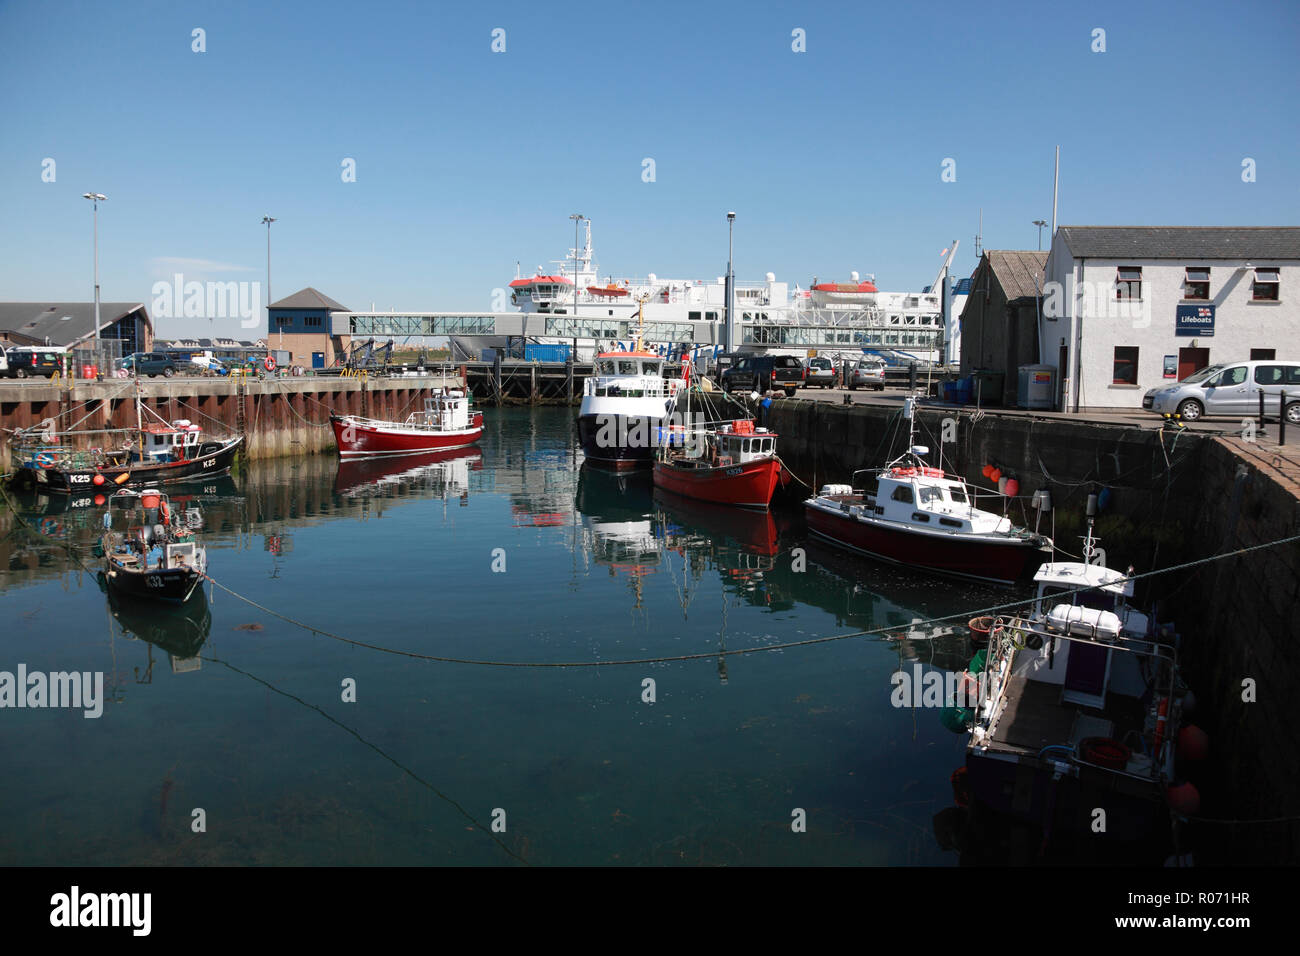 The harbour in Stromness, Orkney with fishing boats and the NorthLink ro-ro ferry Hamnavoe, operated by Serco Stock Photo